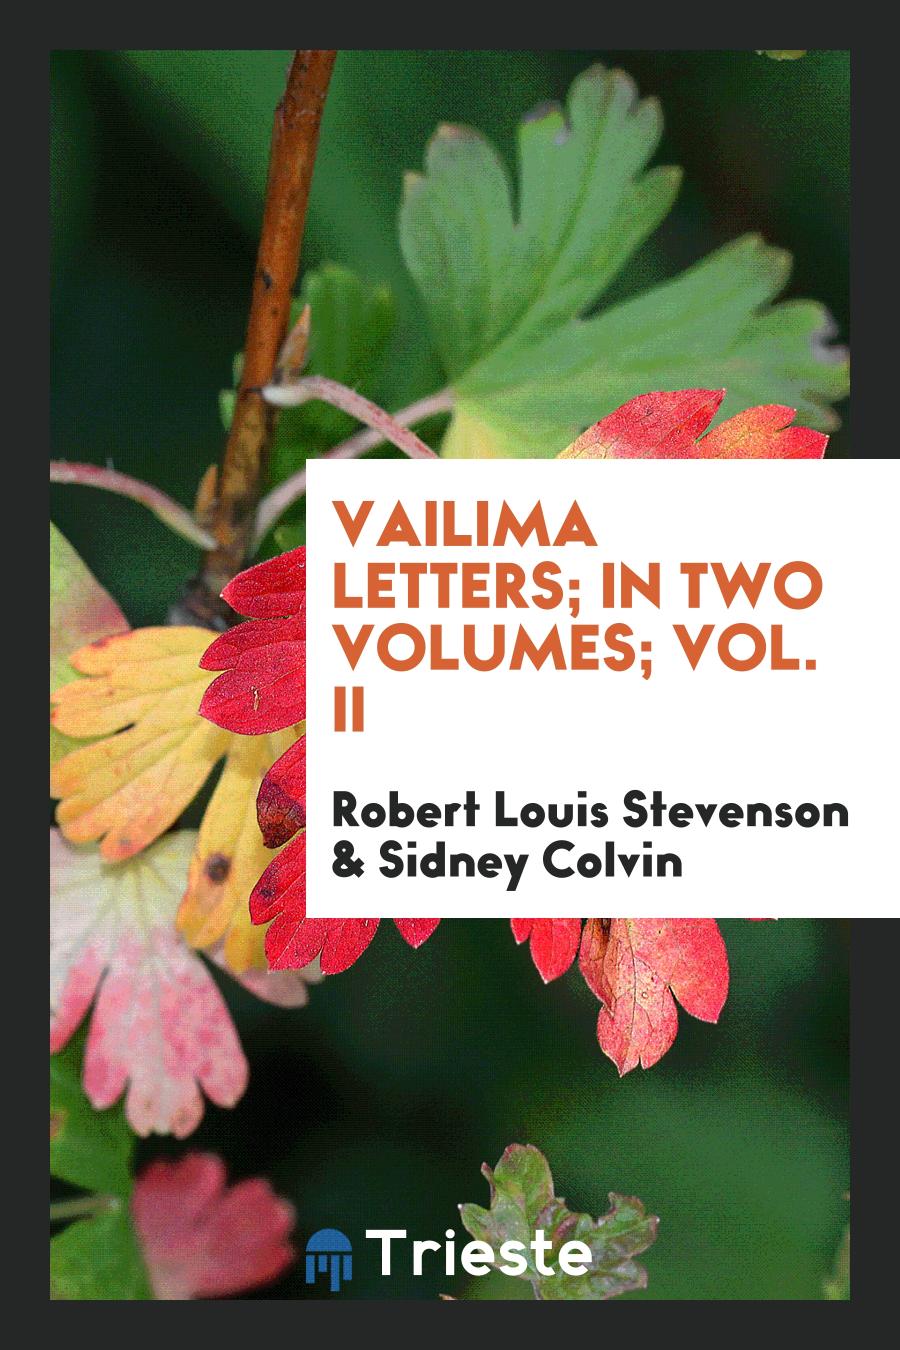 Vailima letters; in two volumes; Vol. II